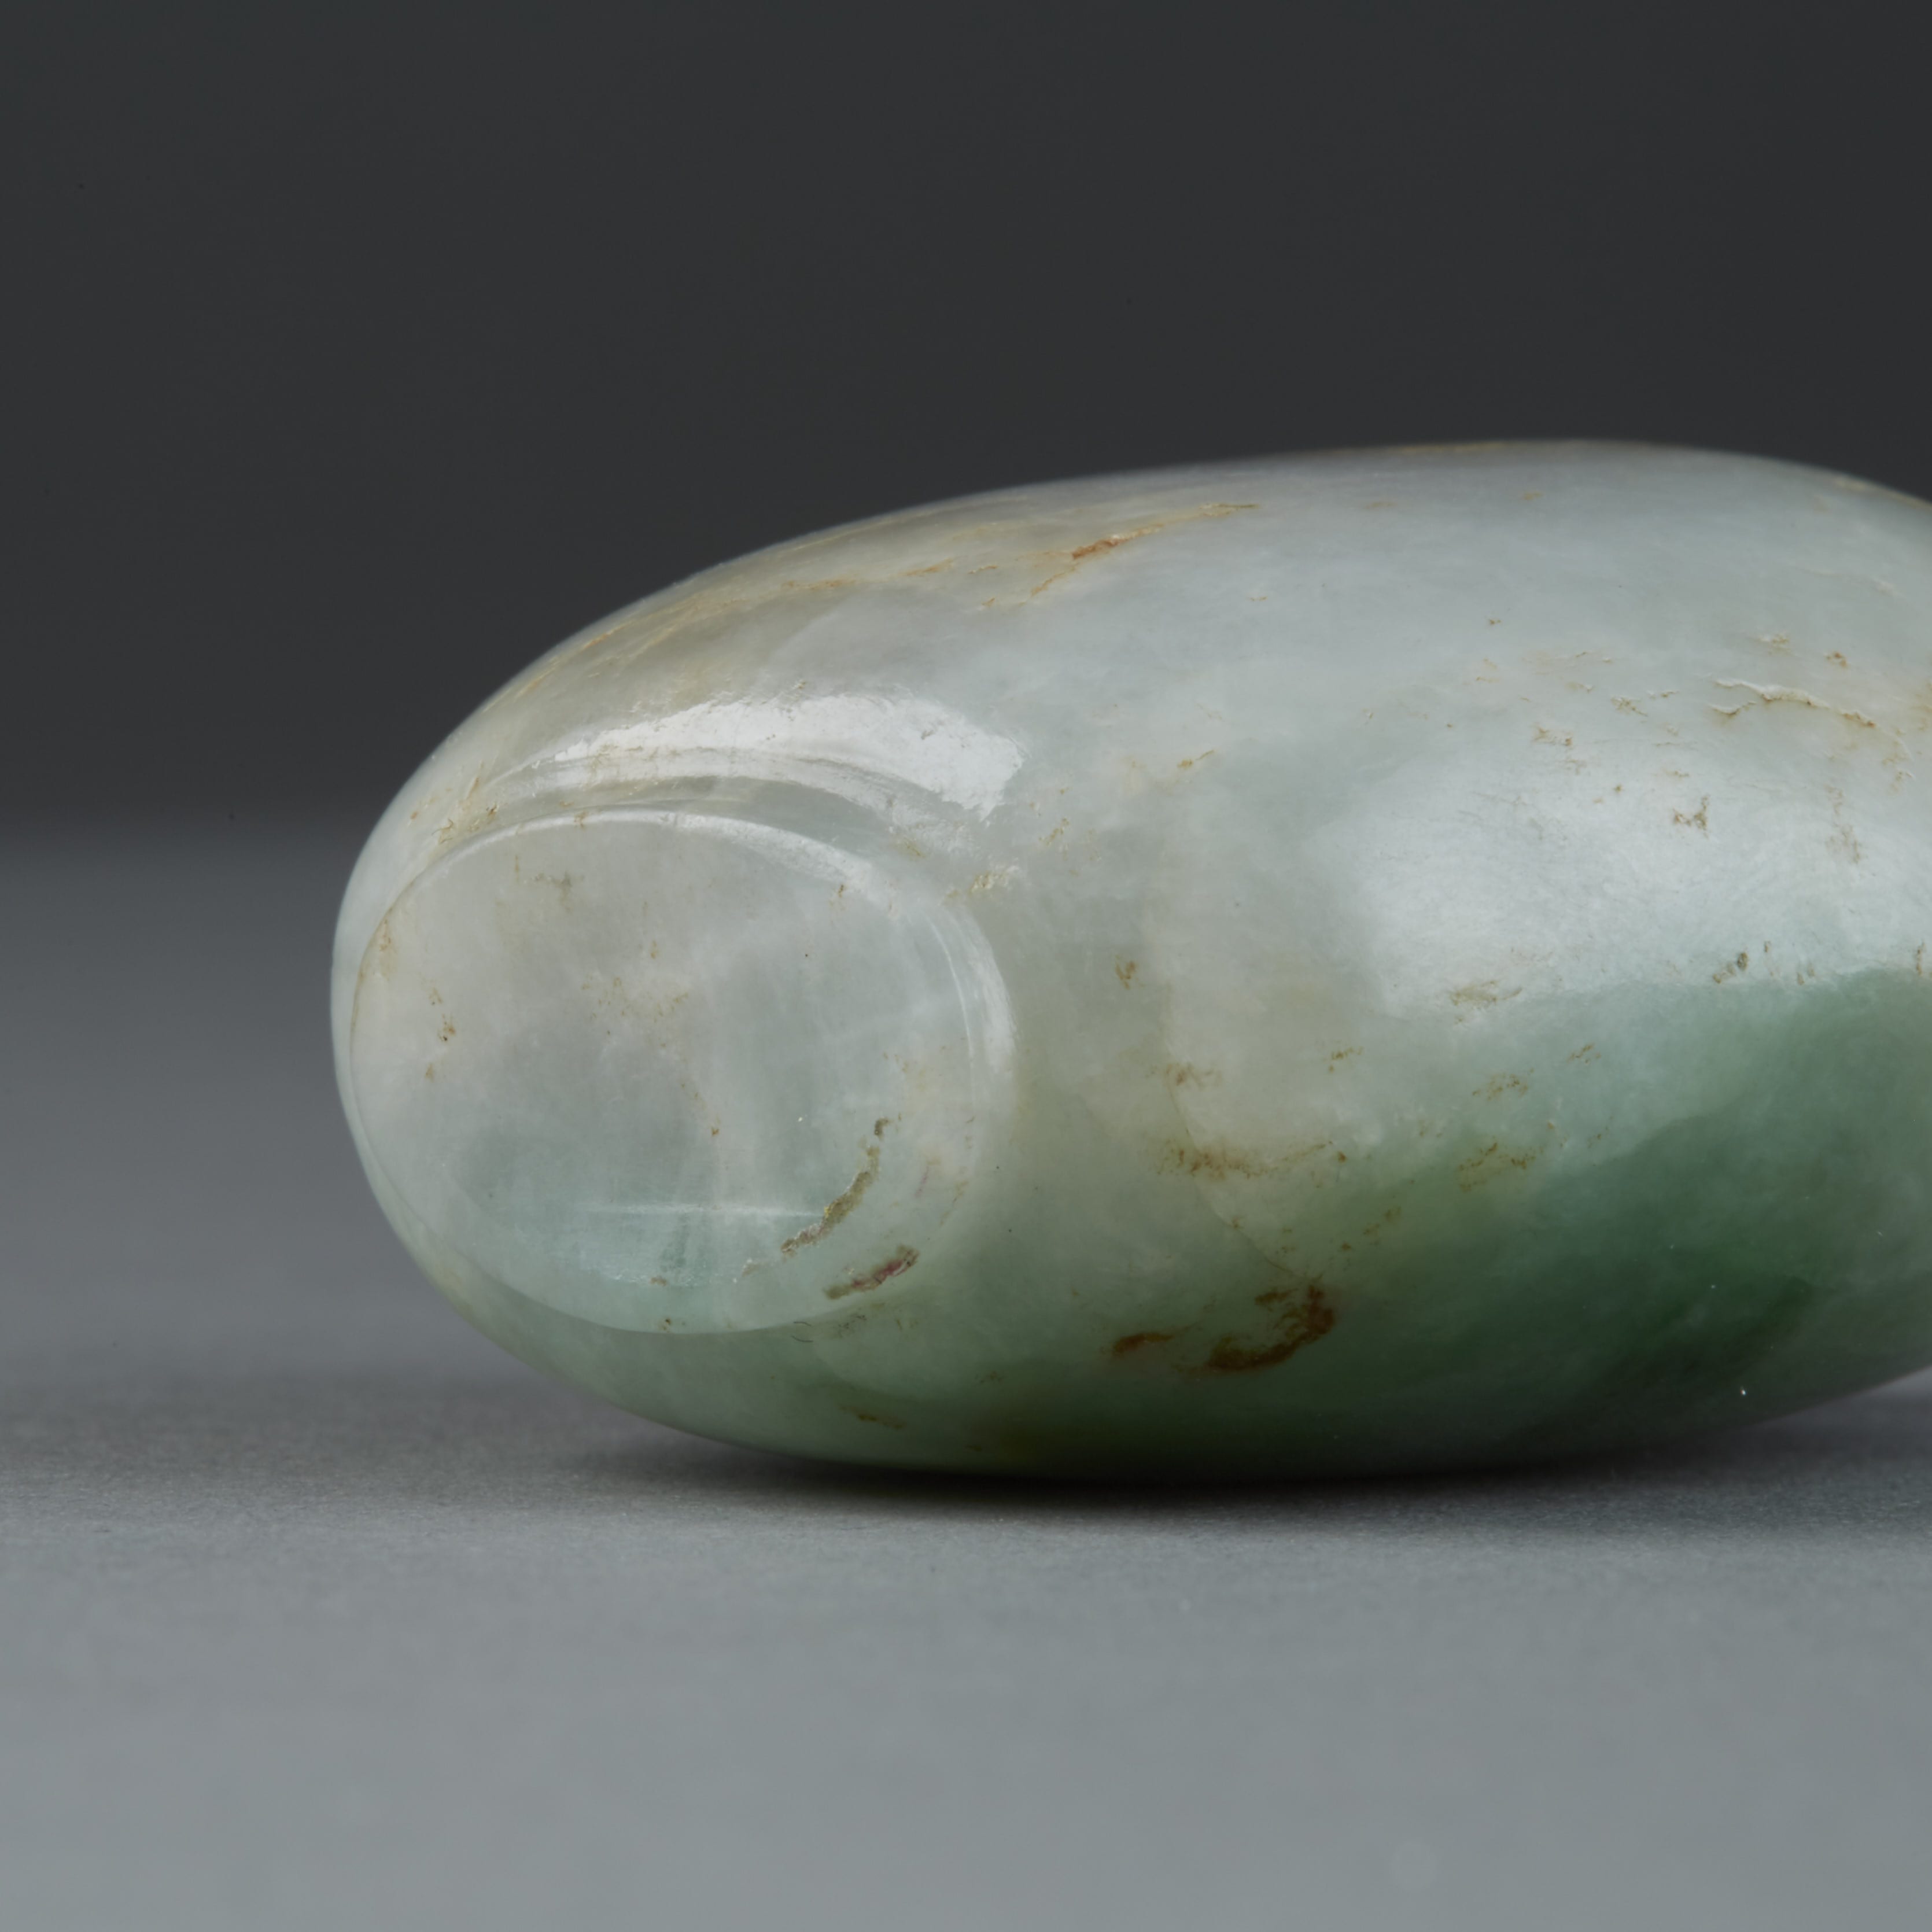 Lot 037: Chinese mottled light and dark green Jade Snuff Bottle with Stopper Early 19th-late 18th Century